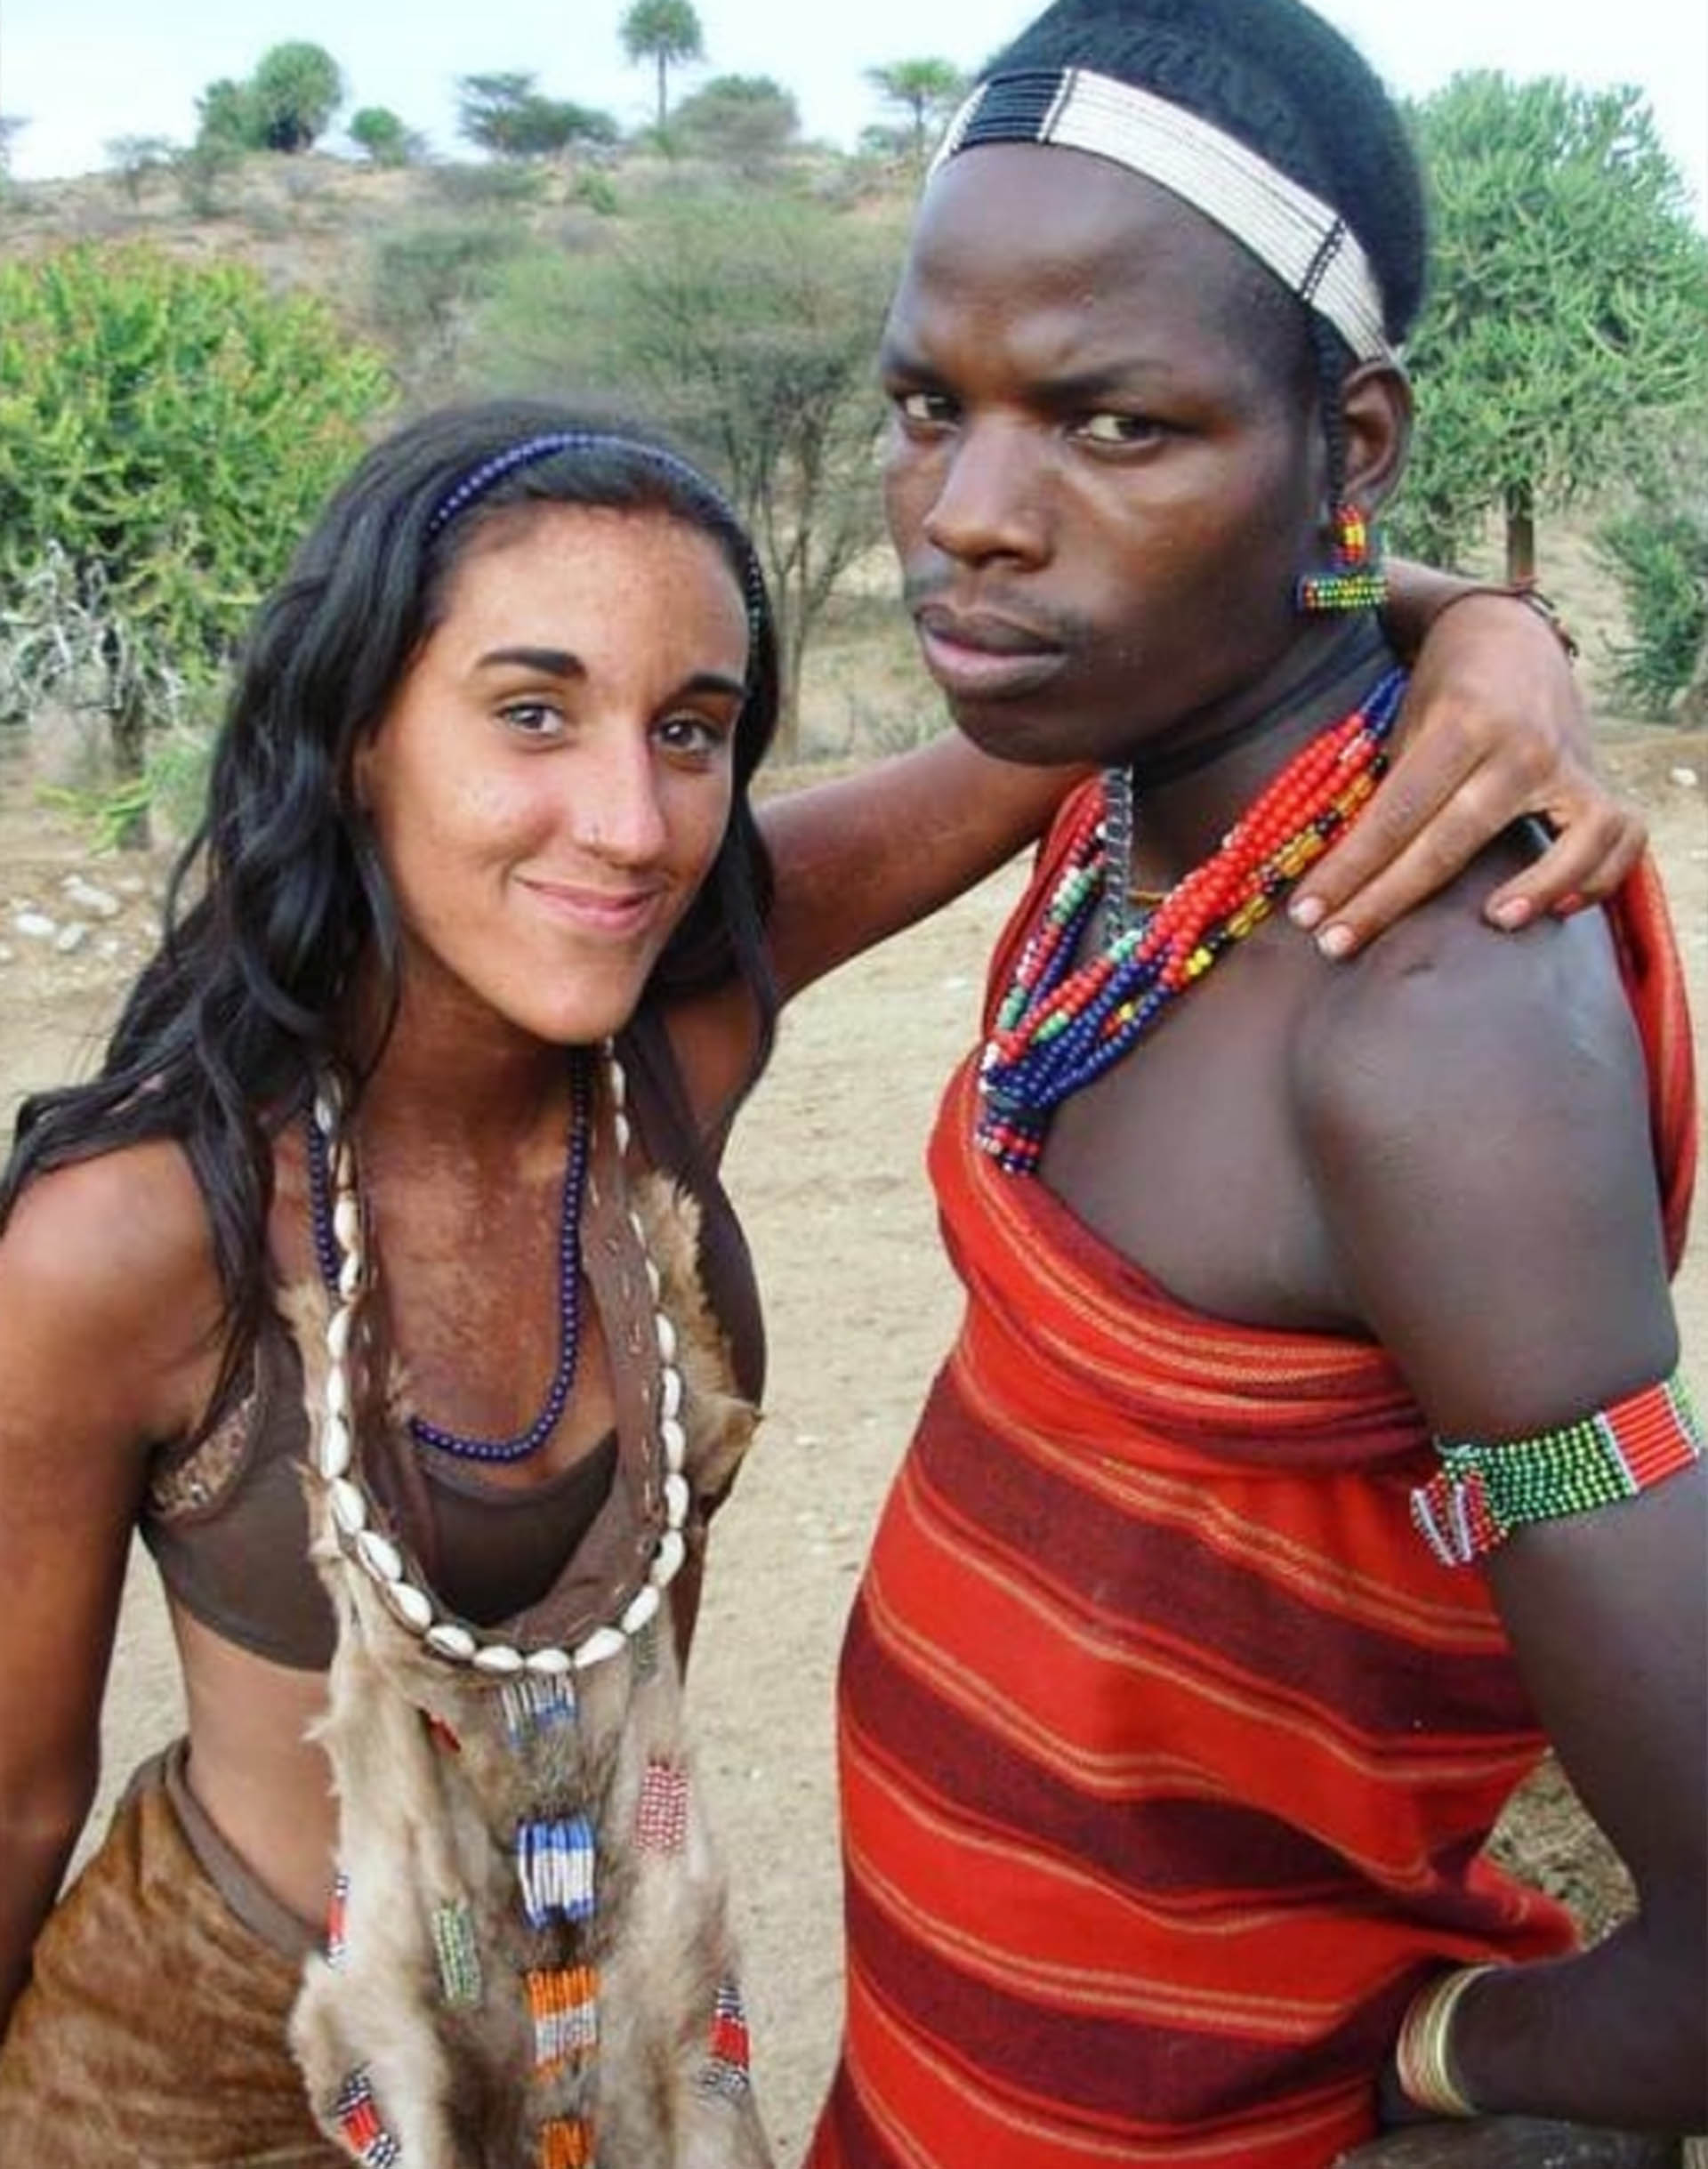 Nicole and Shada, lost in the tribe